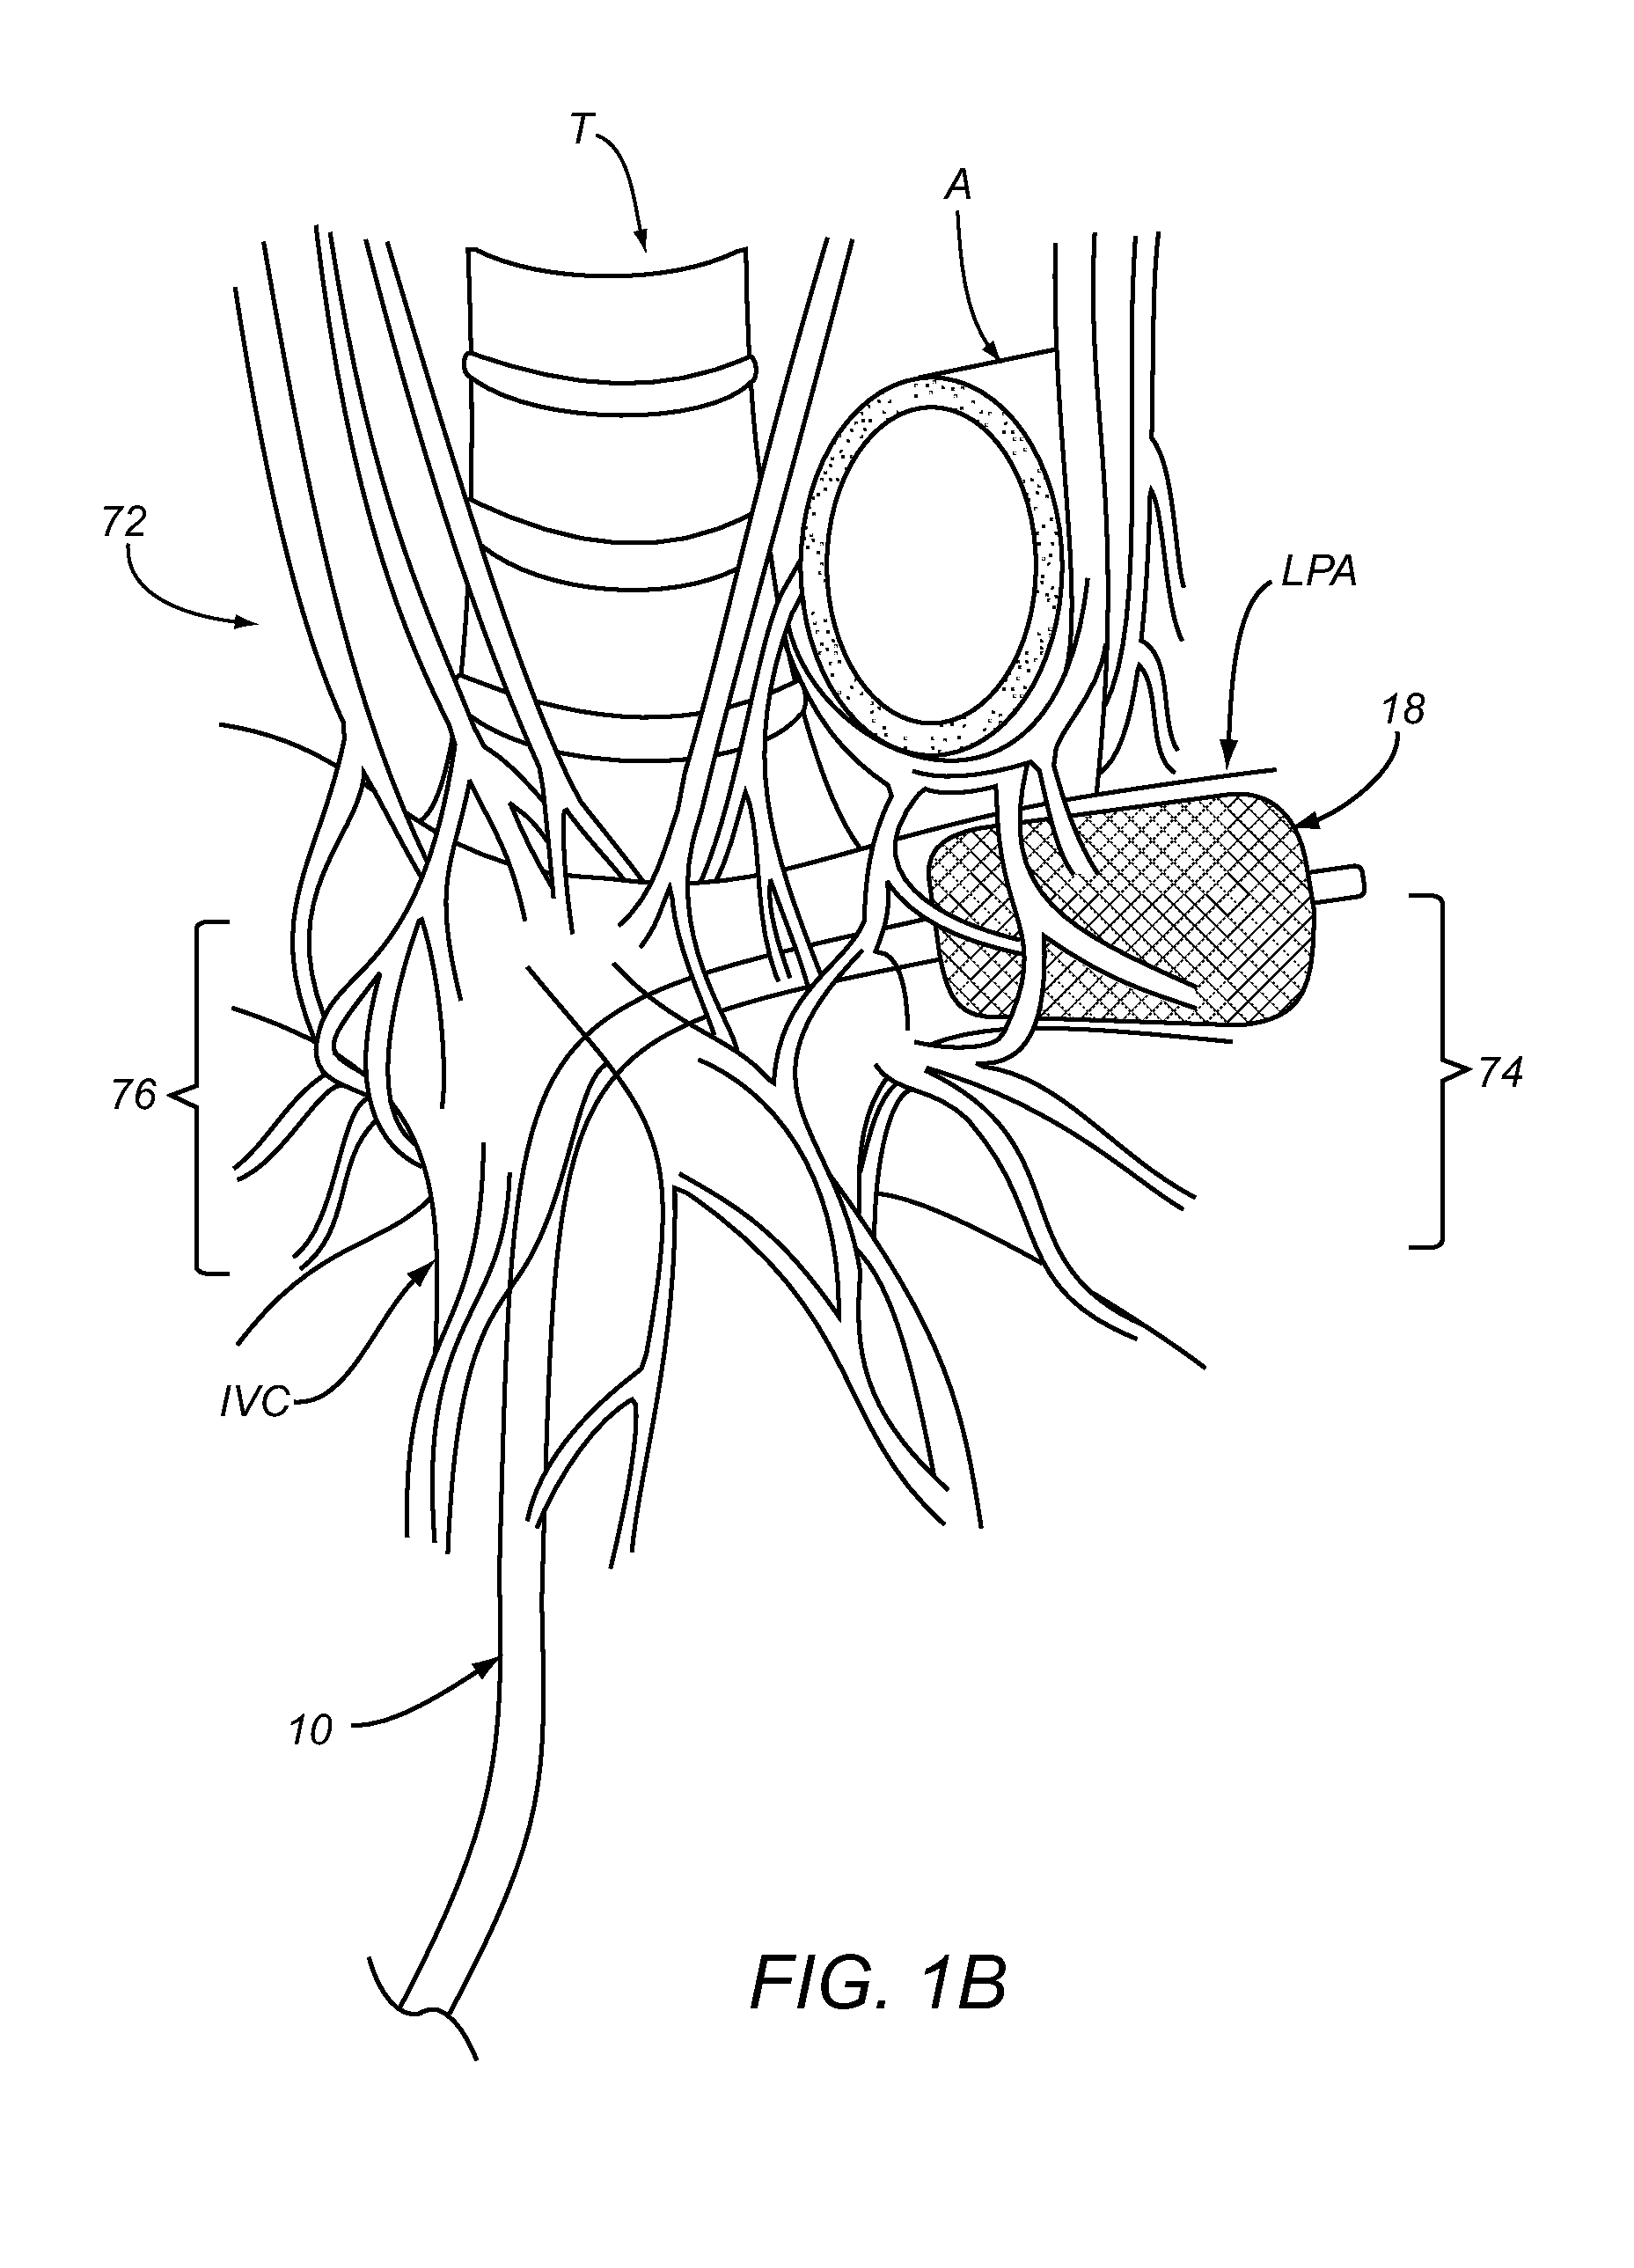 Apparatus and methods for treating pulmonary hypertension